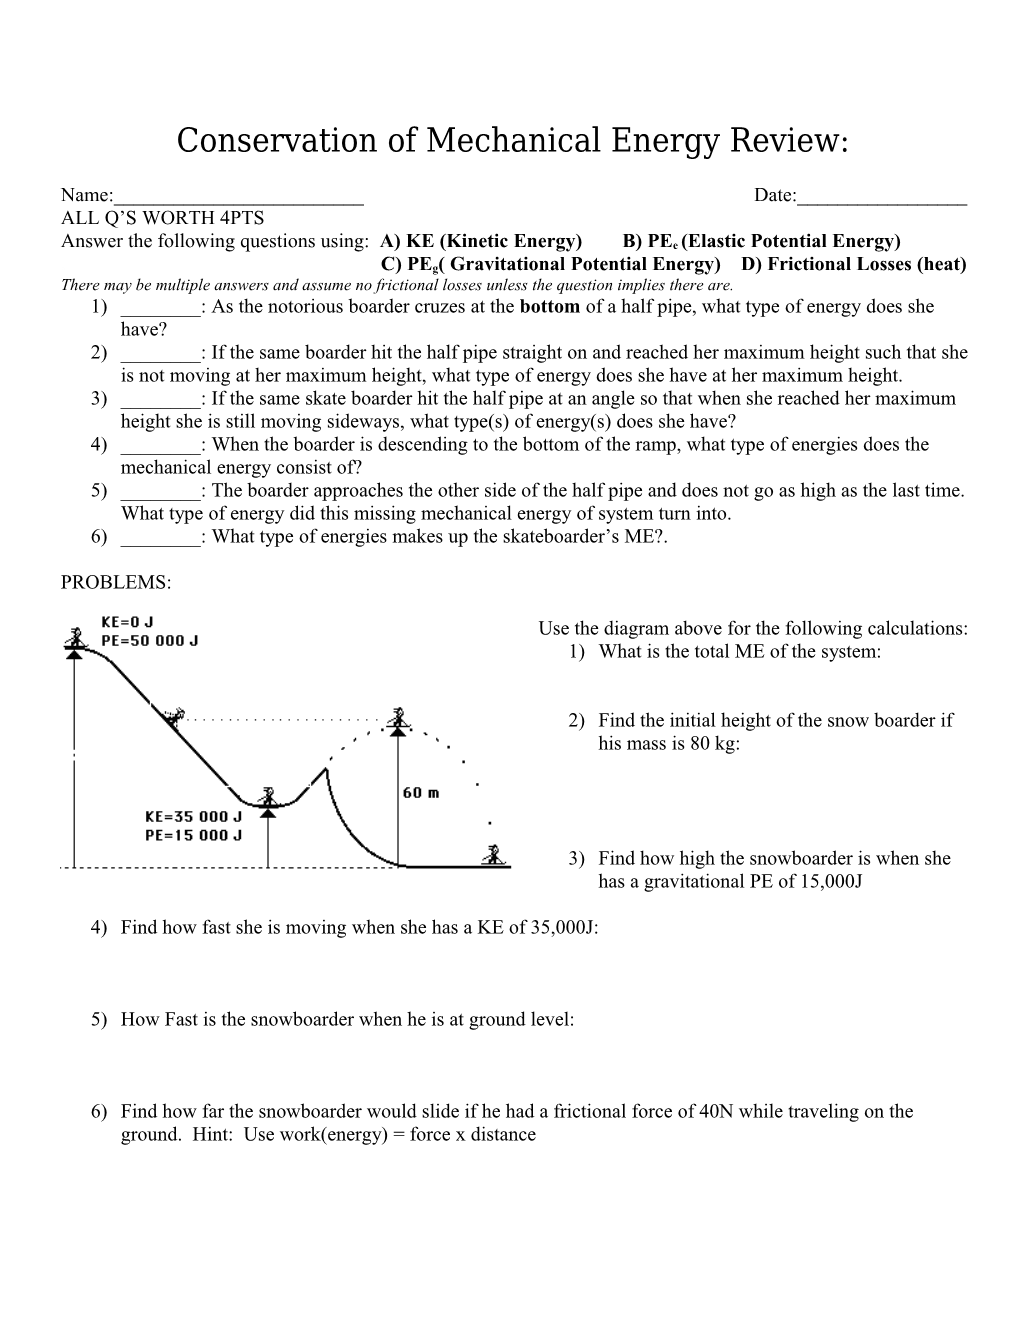 Conservation of Mechanical Energy: Honors/AP